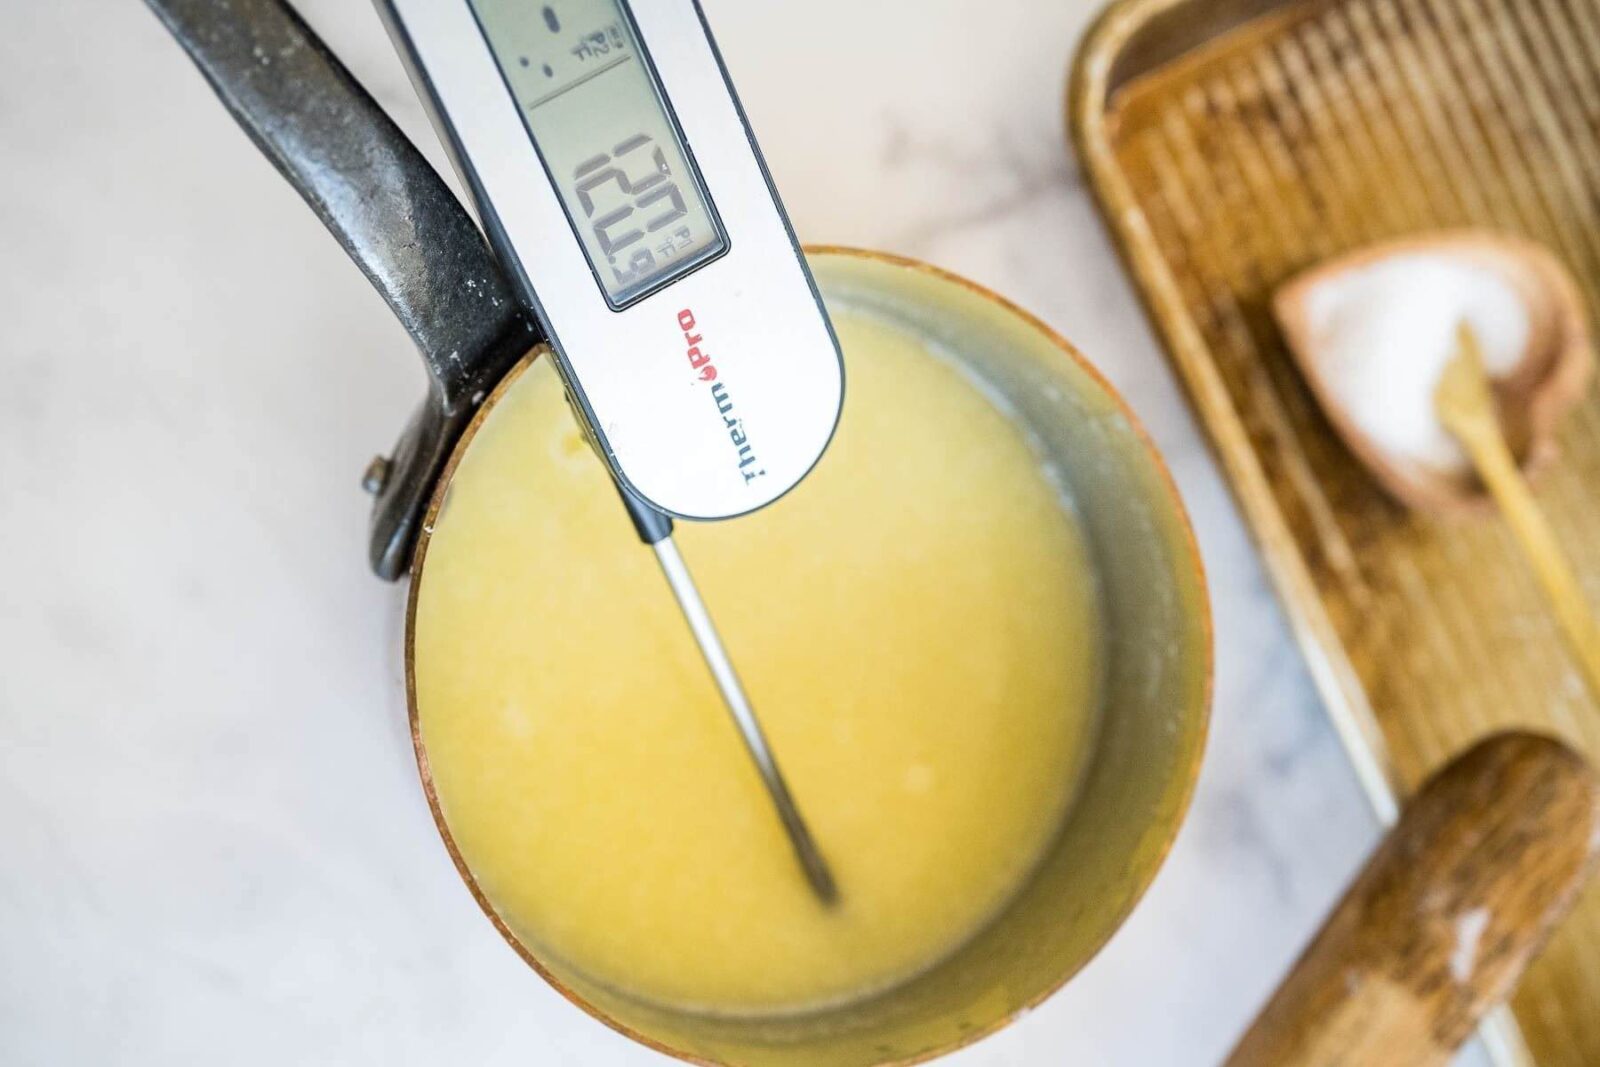 A food thermometer measures a melted butter mixture in a saucepan reading 120 degrees.